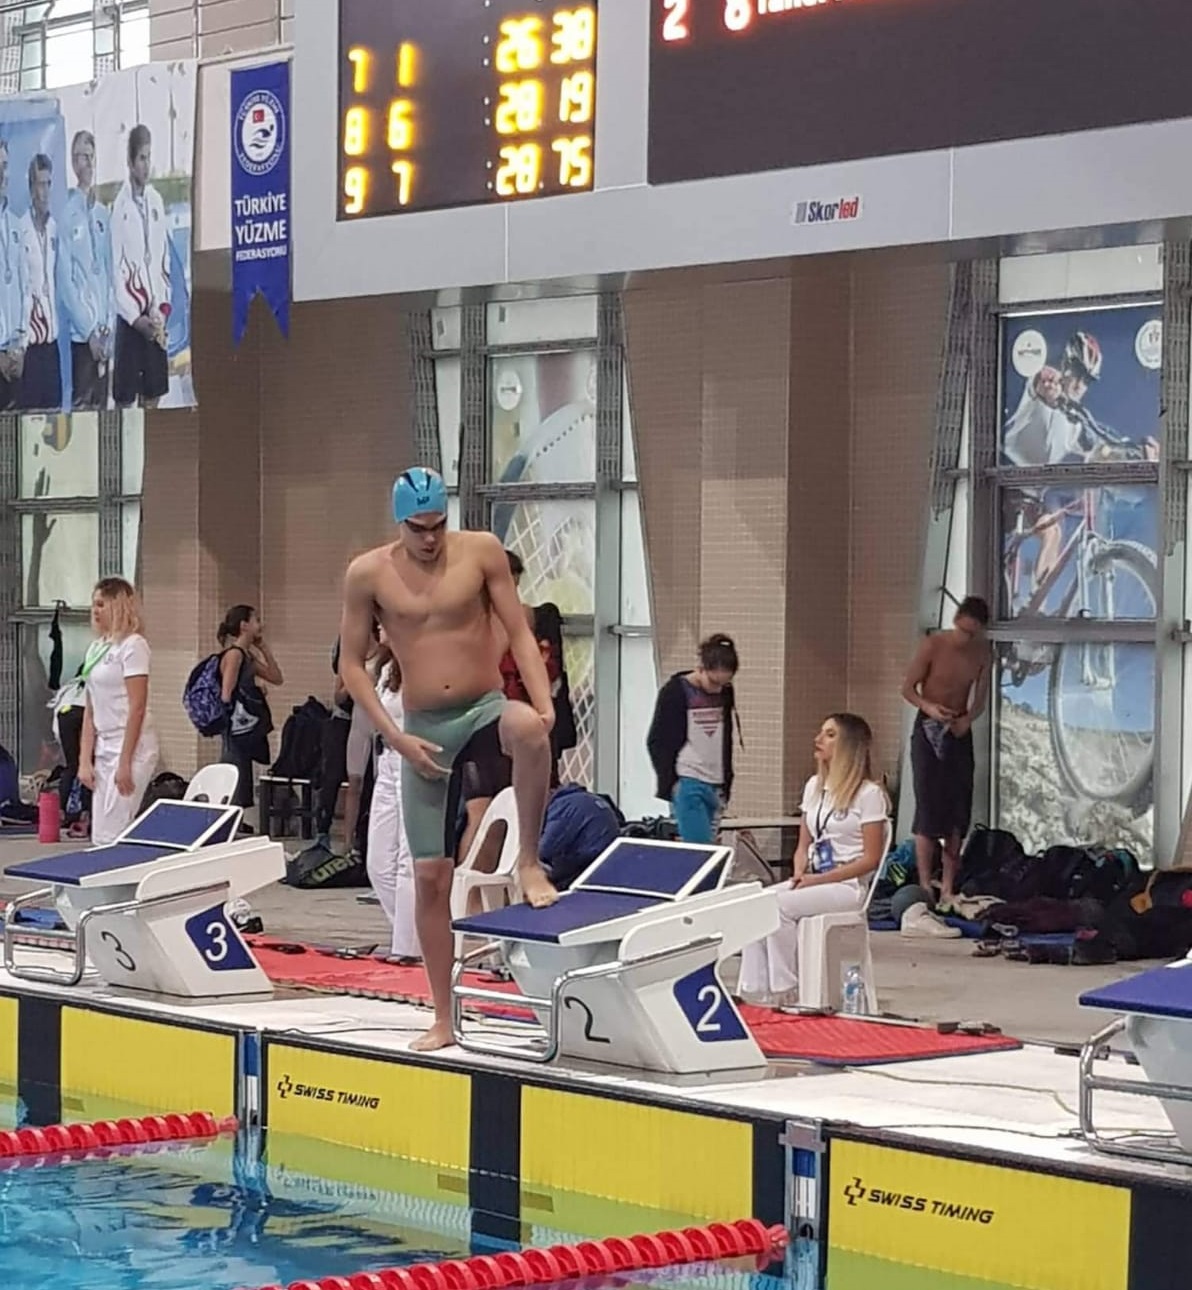 Record News from Near East University Swimmers Doğukan Ulaç and Emre Ersoy